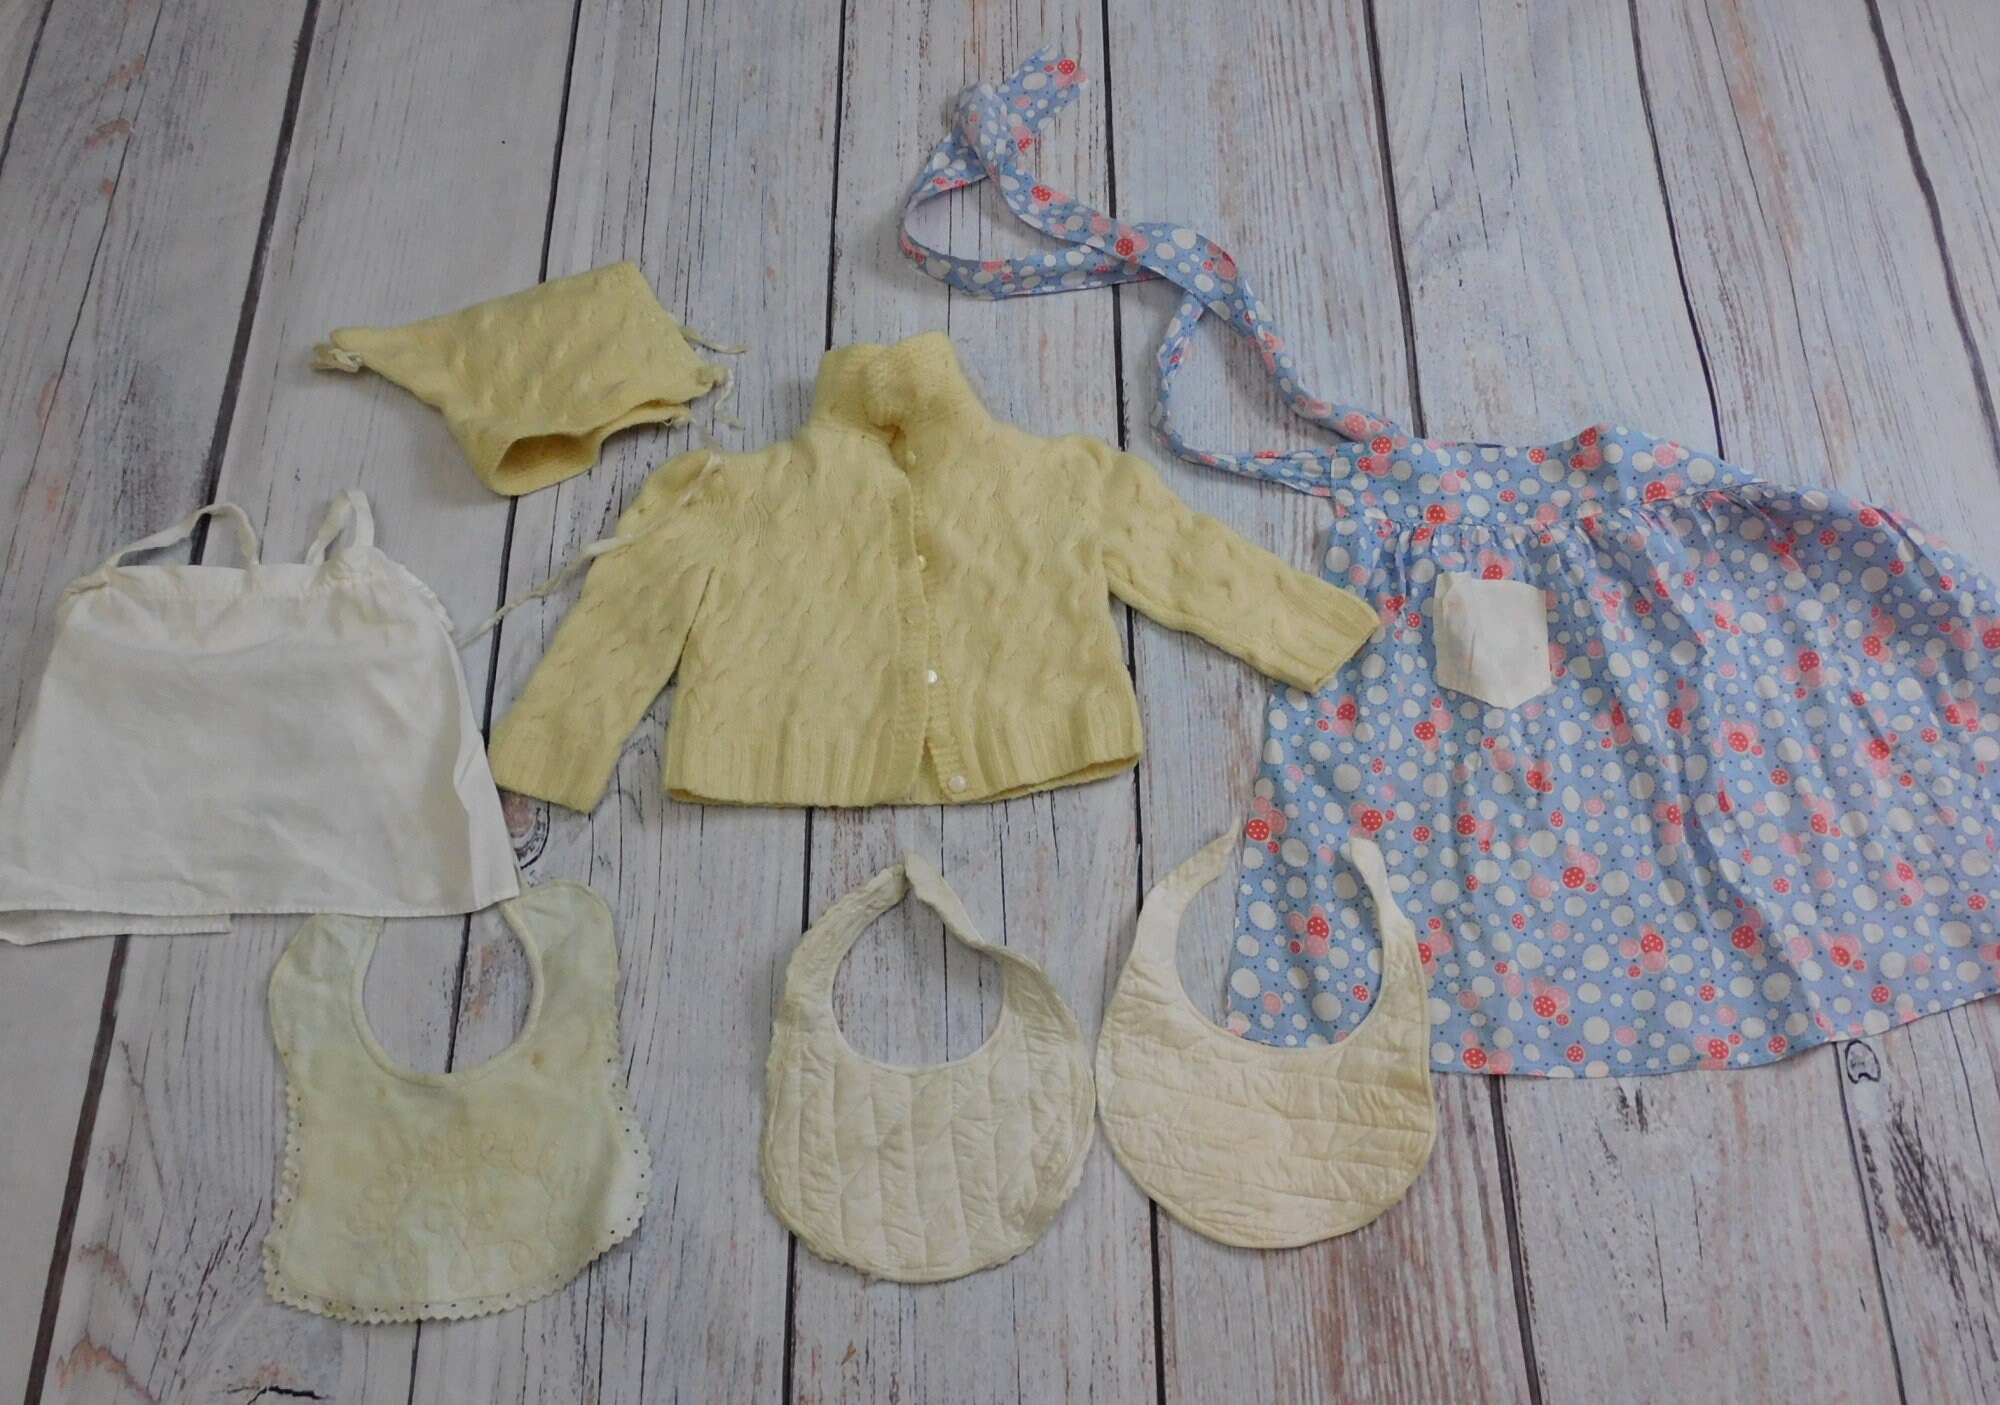 Vintage Aprons, Retro Aprons, Old Fashioned Aprons & Patterns Lot Of Vintage  Antique Baby  Toddler Clothing, 20 Pieces, Slips, Dresses, Sweater, Bibs, 1920S 1930S 1940S 1950S $35.00 AT vintagedancer.com